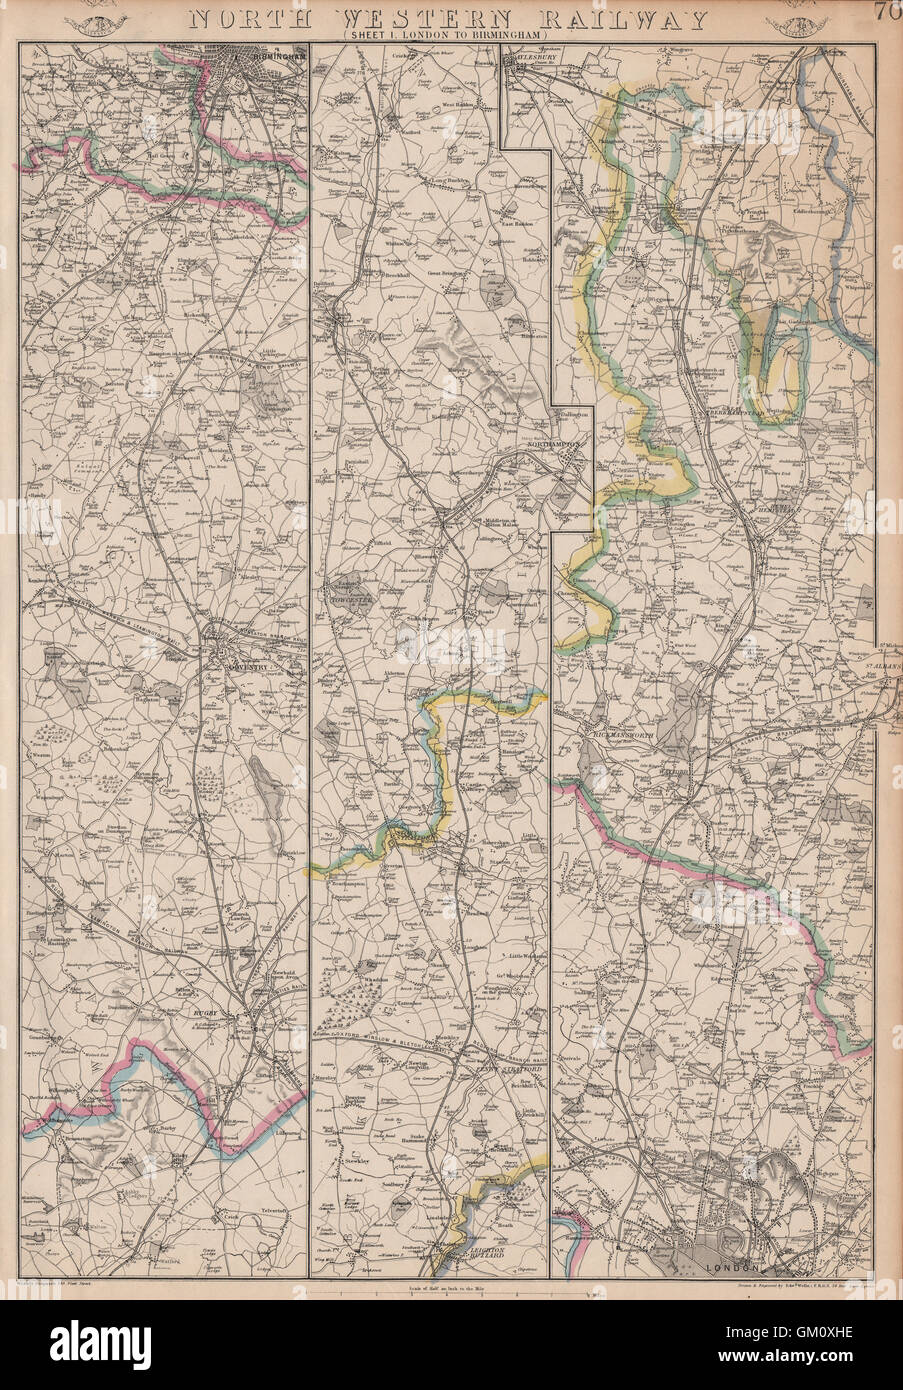 NORTH WESTERN RAILWAY 1. London to Rugby, Coventry & Birmingham.WELLER, 1863 map Stock Photo